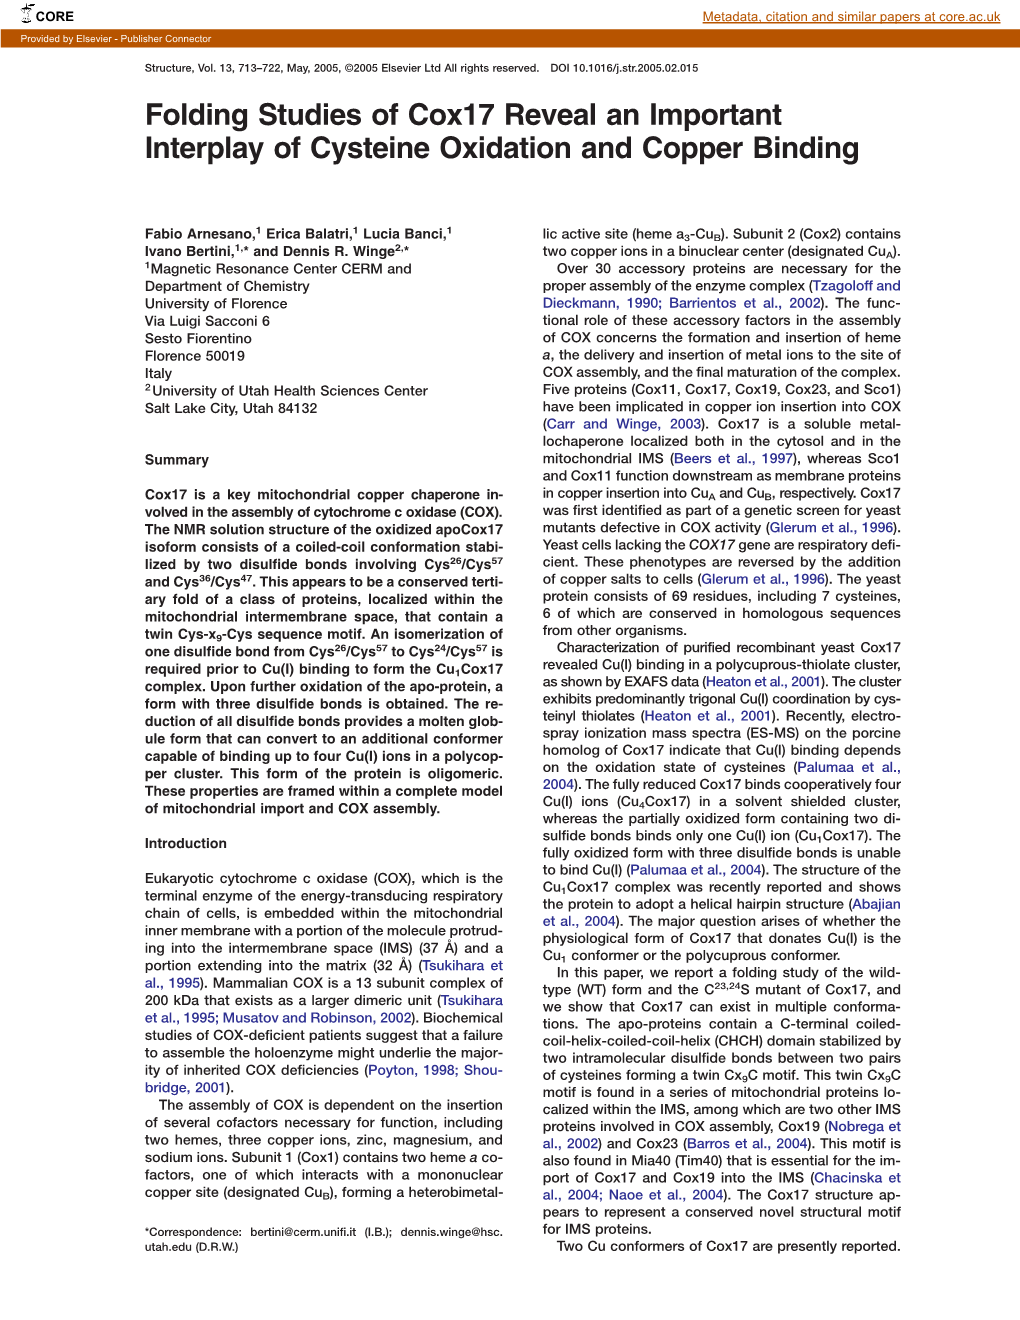 Folding Studies of Cox17 Reveal an Important Interplay of Cysteine Oxidation and Copper Binding